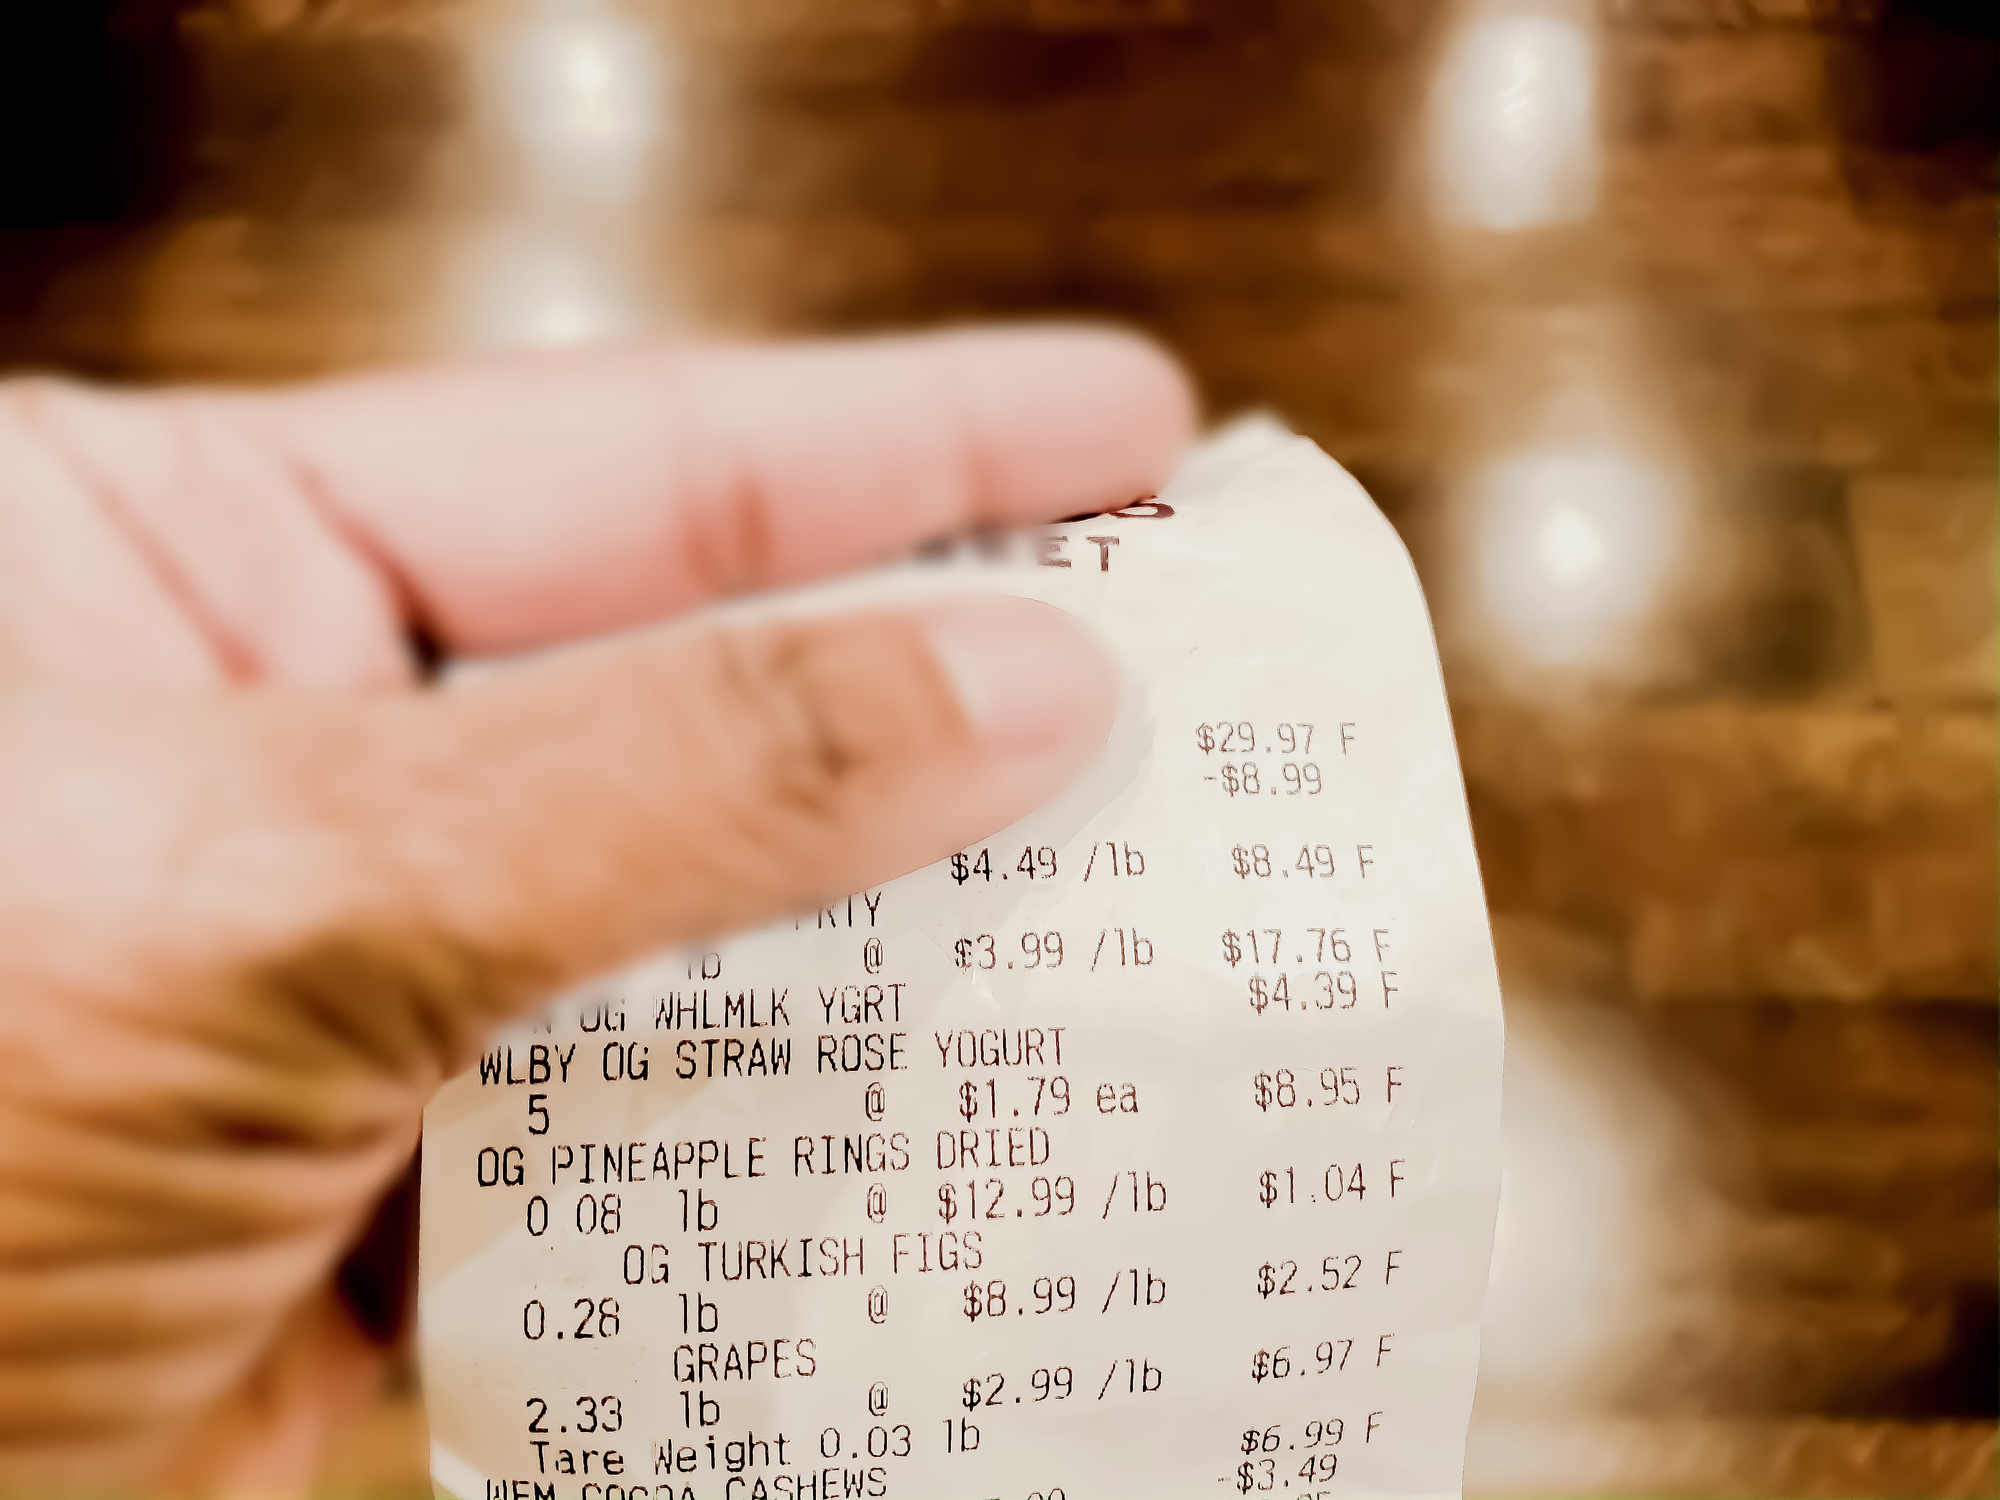 Person reviewing a grocery receipt, possibly managing household expenses